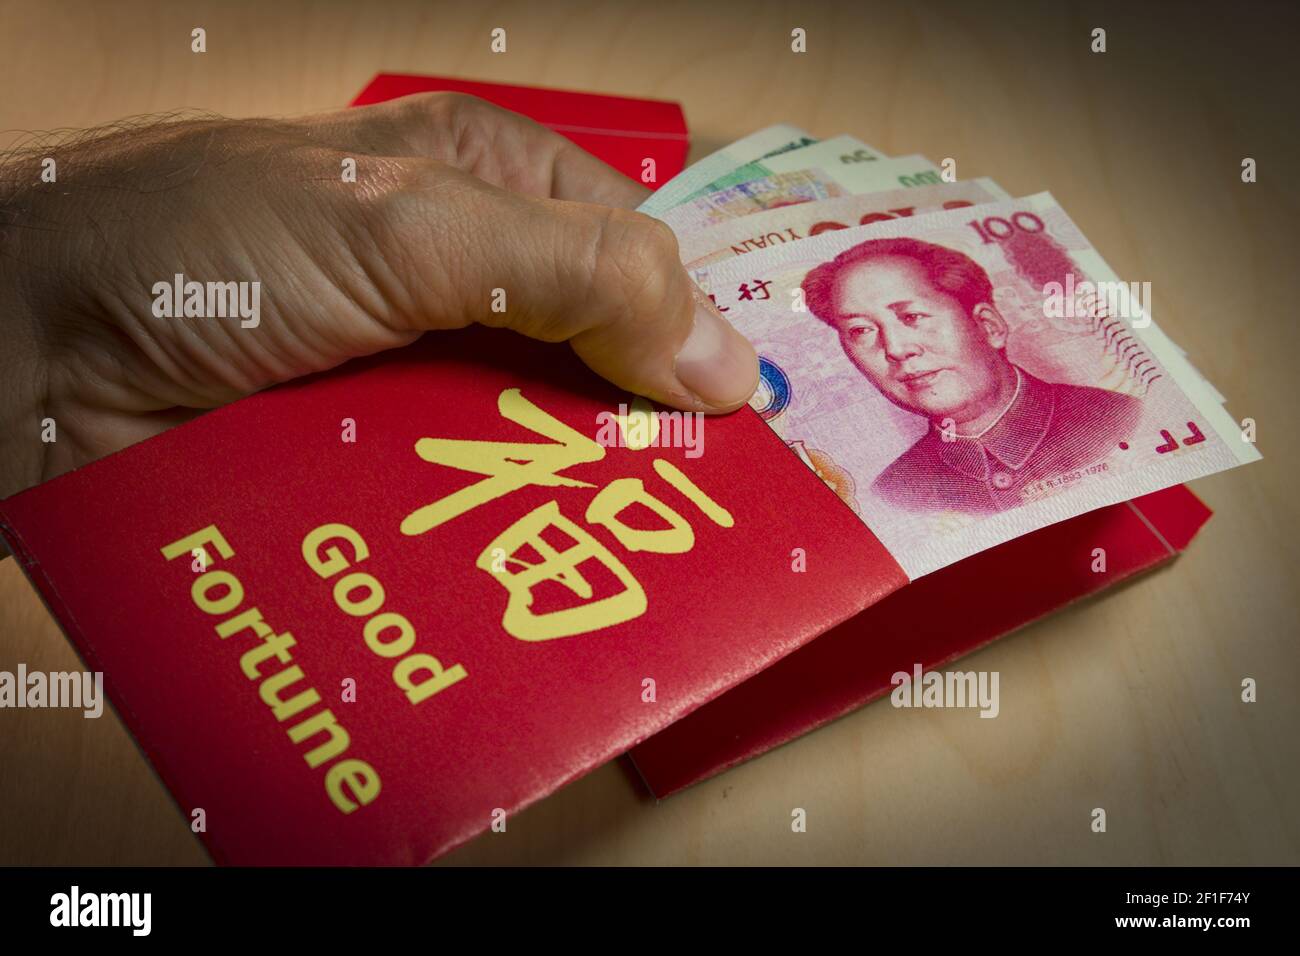 Money Cash in Red Envelope isolated on White Background. Chinese